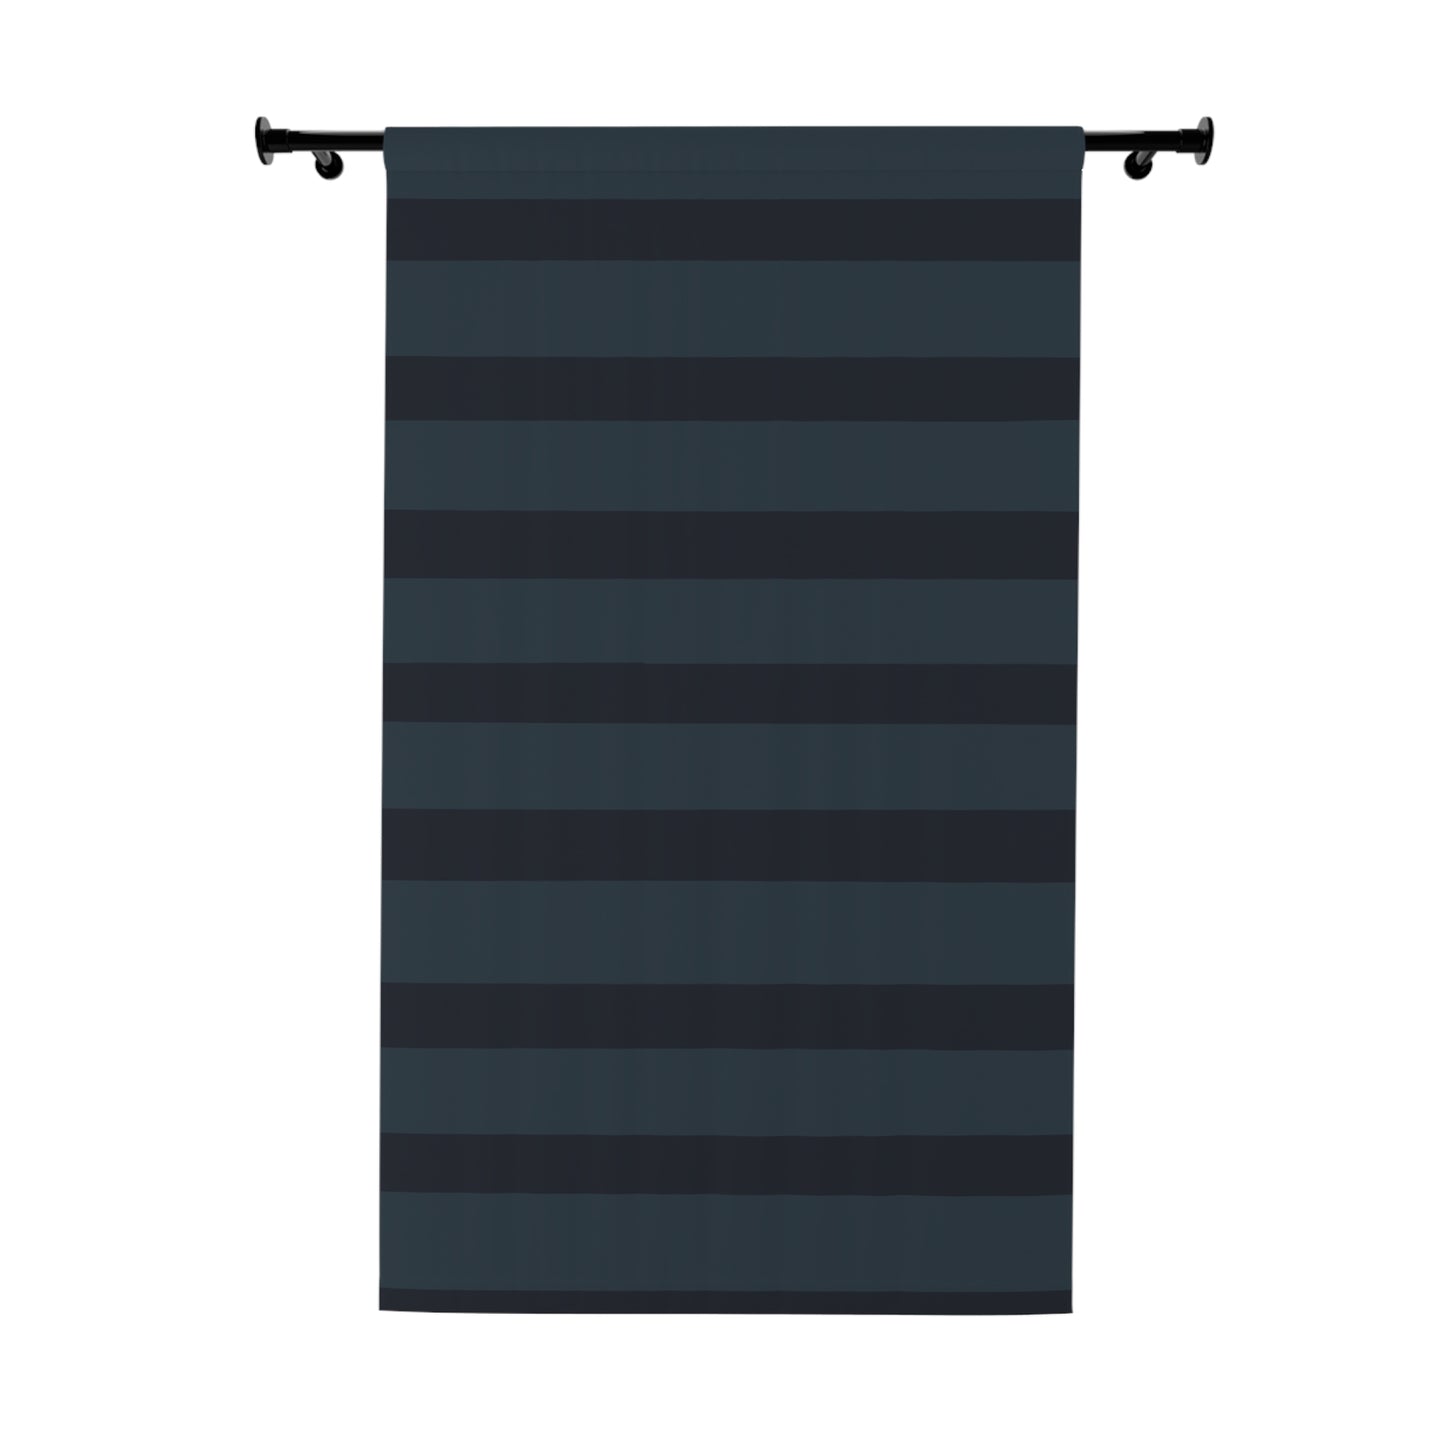 Vampire Art Grunge Preppy Goth Black and Charcoal Striped Blackout Window Curtains (1 Piece)